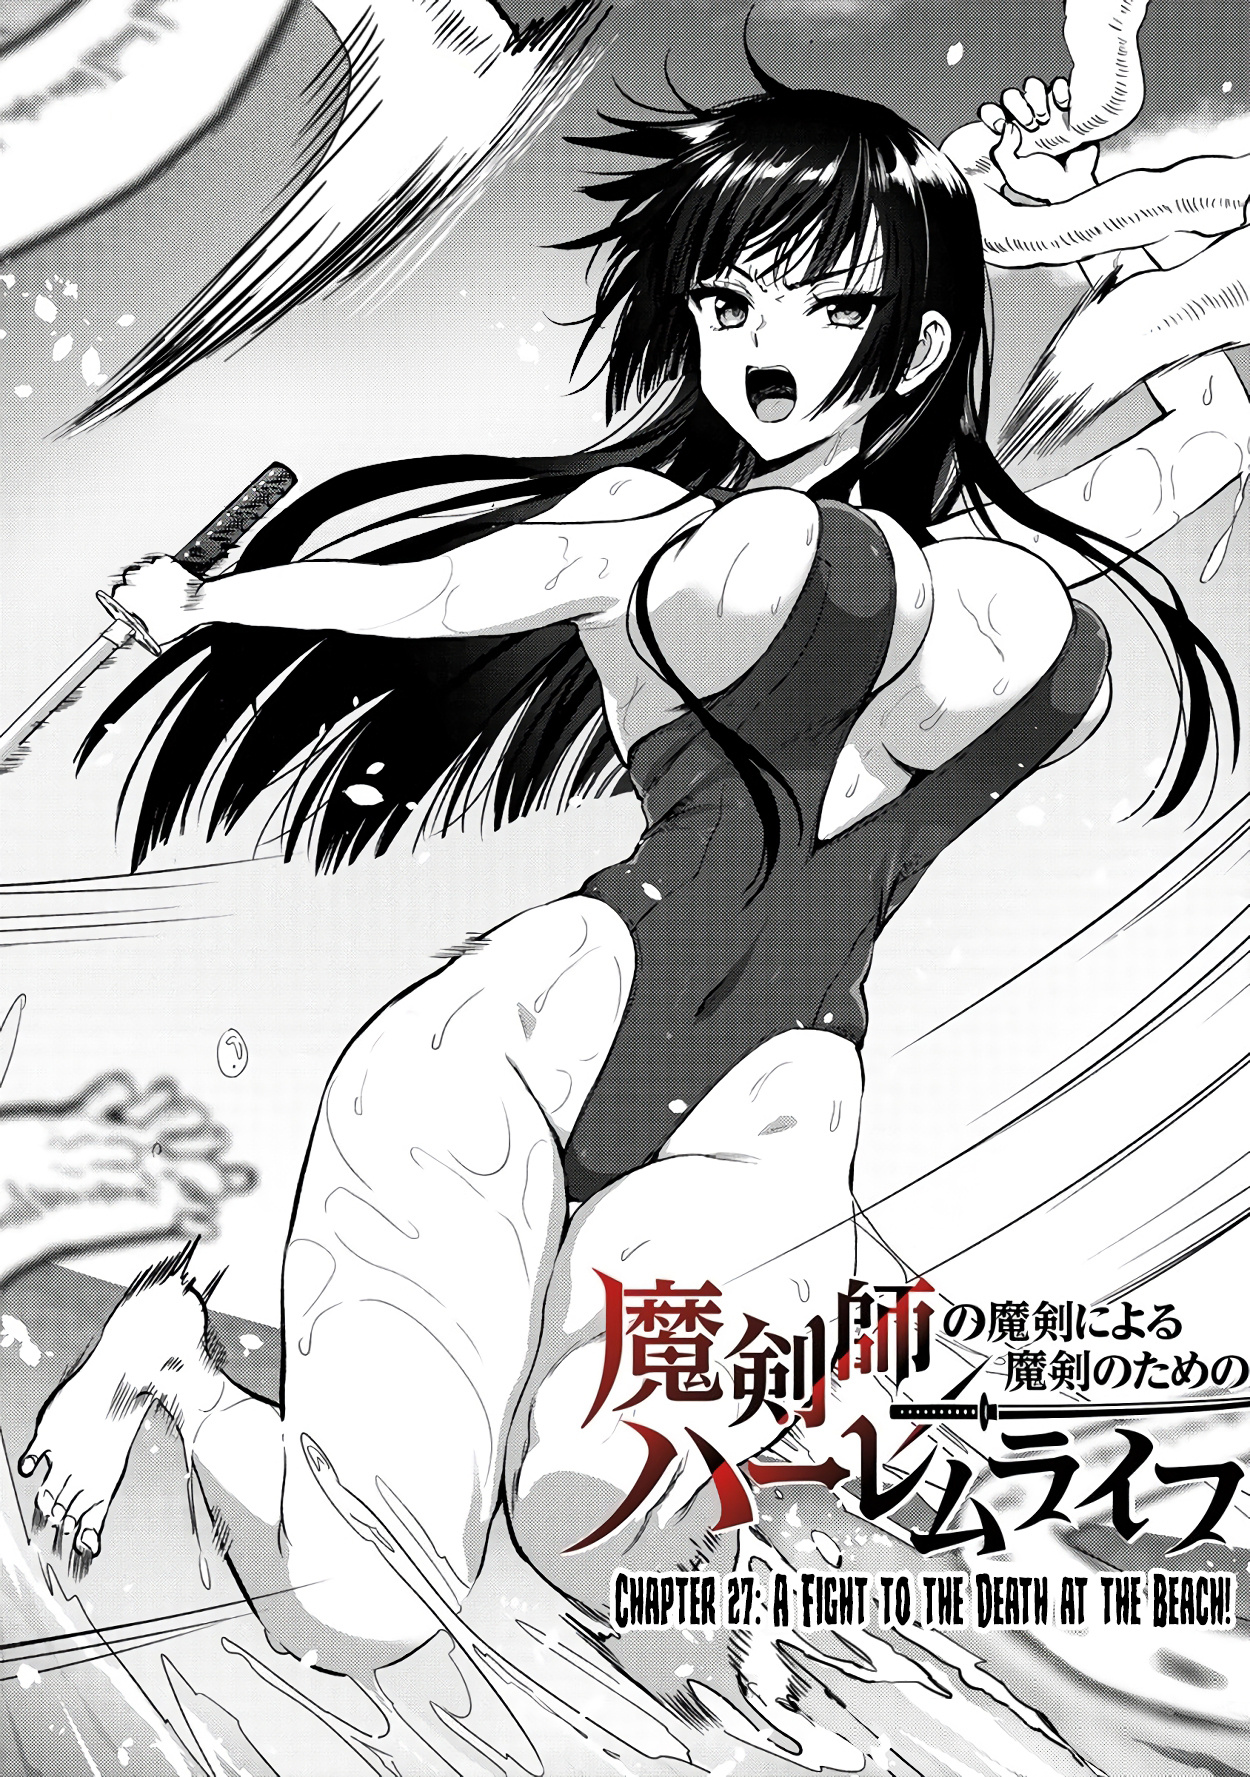 The Cursed Sword Master’S Harem Life: By The Sword, For The Sword, Cursed Sword Master Chapter 27: A Fight To The Death At The Beach! - Picture 3